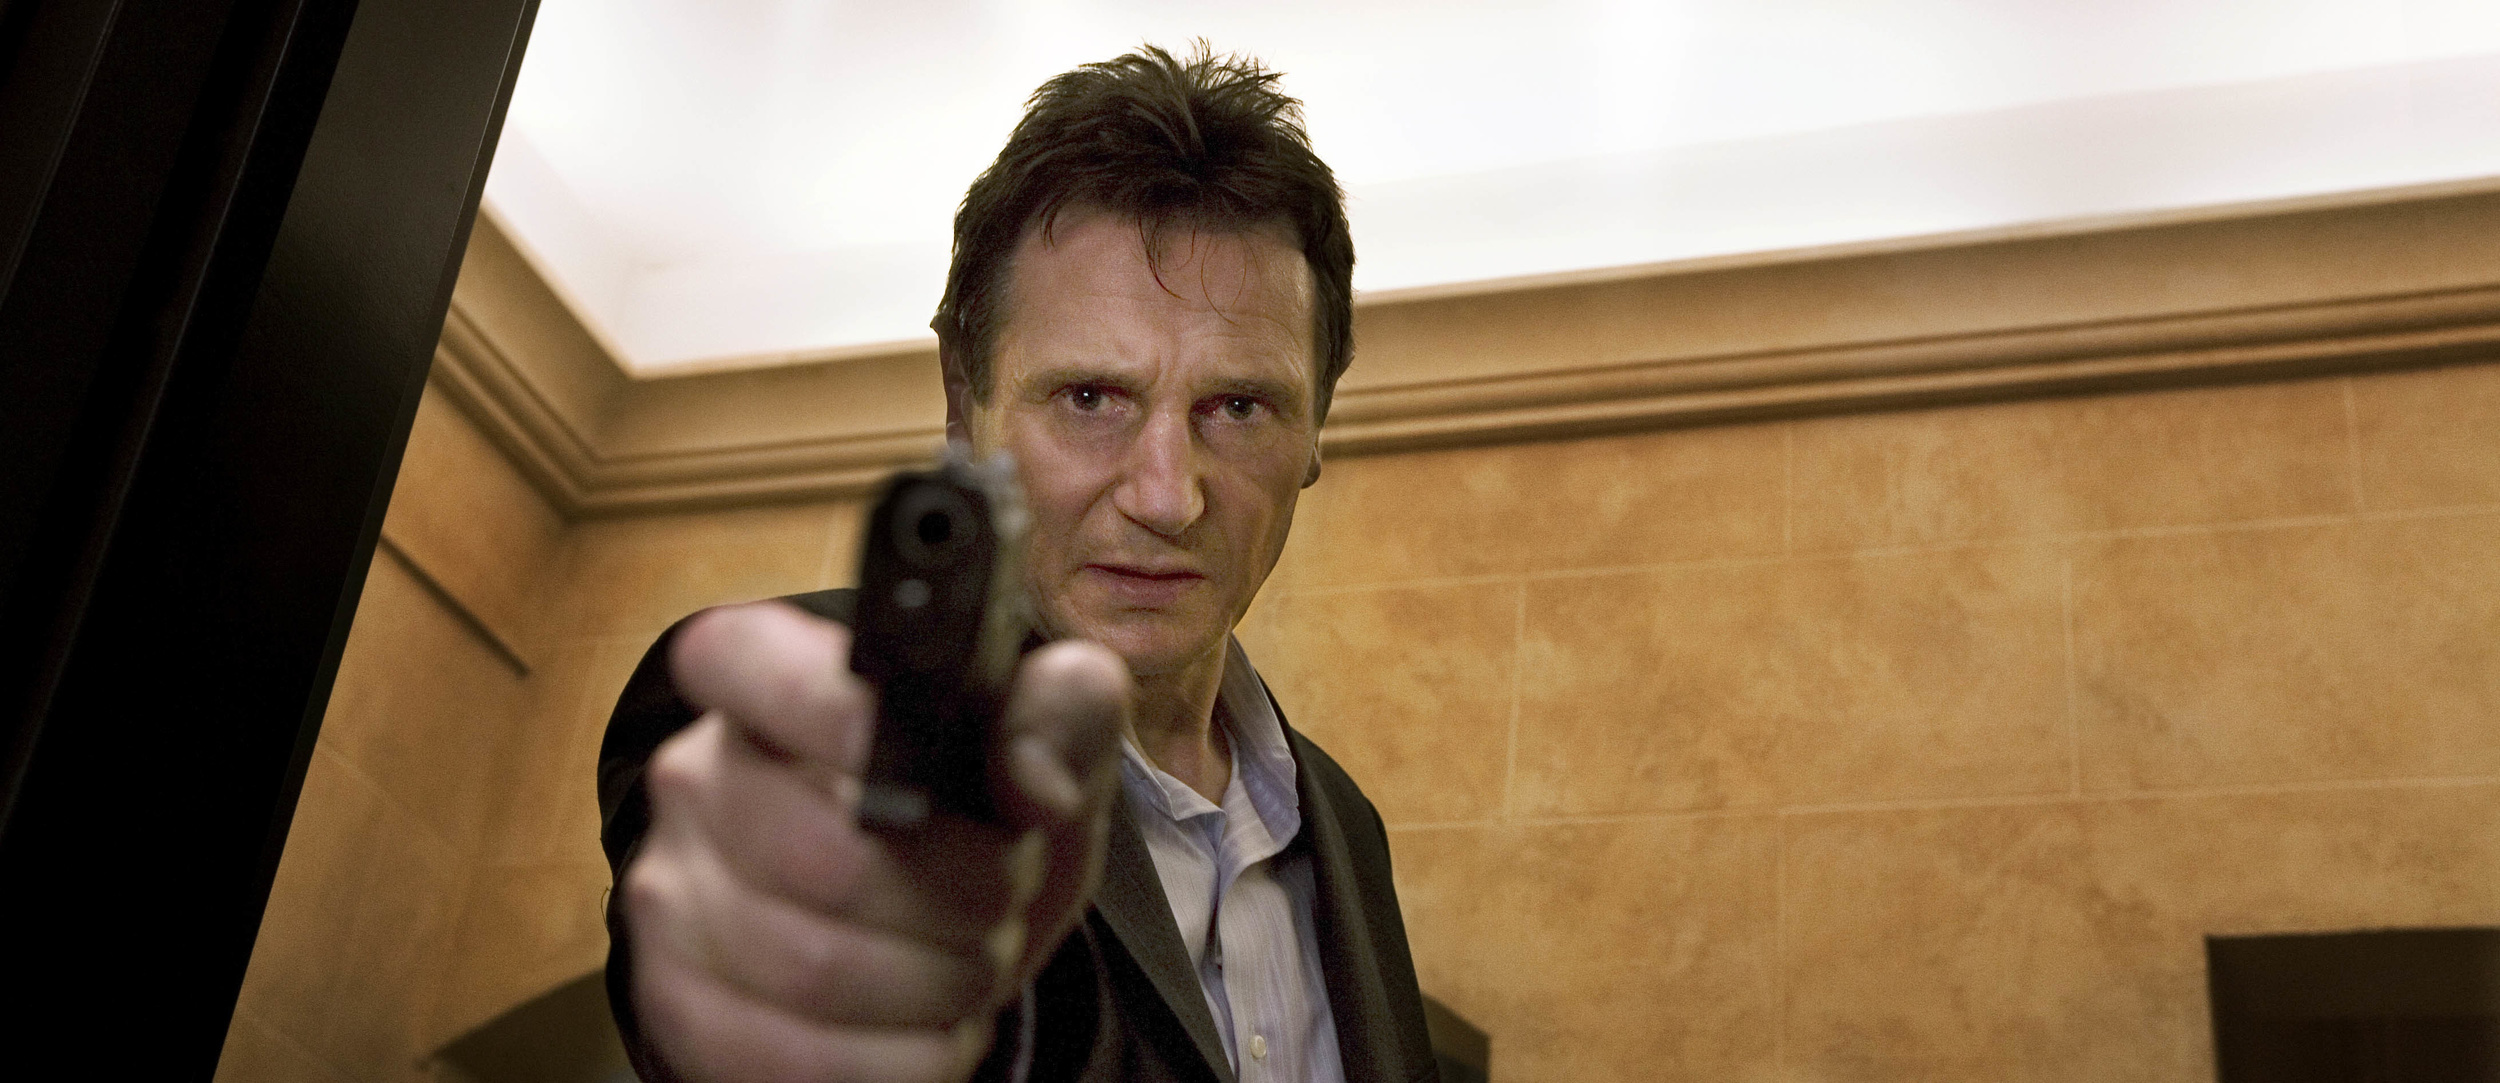 <p><span><span>Liam Neeson is used to playing the hero (see "Schindler’s List," "Michael Collins," "Les Misérables," etc.) and has appeared in his fair share of action films, but casting him as a CIA assassin in "Taken" marked a complete turnaround for the Irish actor. Neeson went on to star in the film’s two sequels, as well as numerous future action/adventure blockbusters, including "The A-Team," "The Grey," "A Walk Among the Tombstones," and "Run All Night."</span></span></p><p>You may also like: <a href='https://www.yardbarker.com/entertainment/articles/one_and_done_20_great_films_we_never_want_to_watch_again_041224/s1__38983183'>One and done: 20 great films we never want to watch again</a></p>